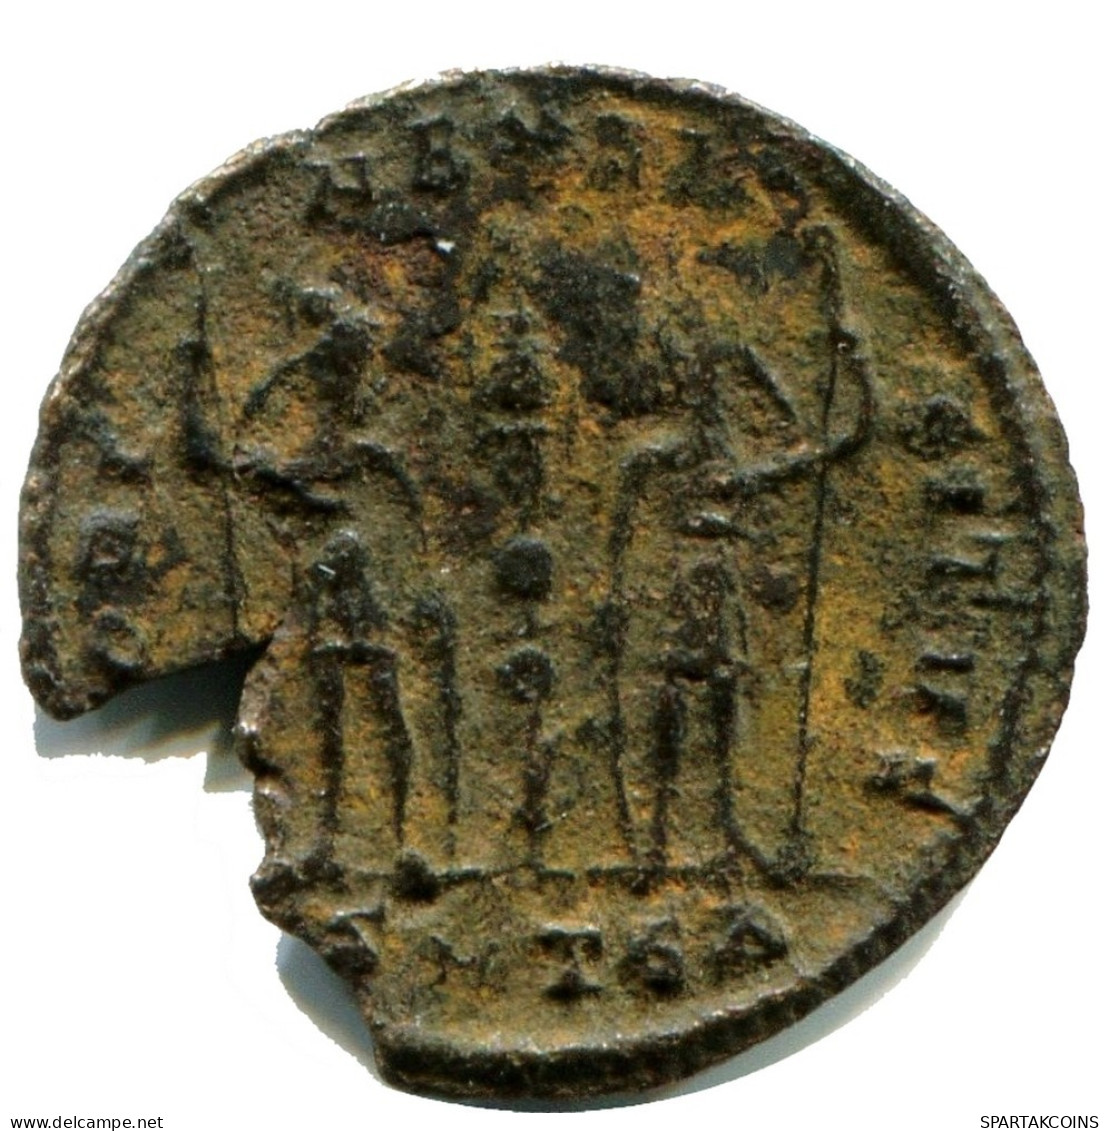 CONSTANS MINTED IN THESSALONICA FOUND IN IHNASYAH HOARD EGYPT #ANC11914.14.E.A - L'Empire Chrétien (307 à 363)